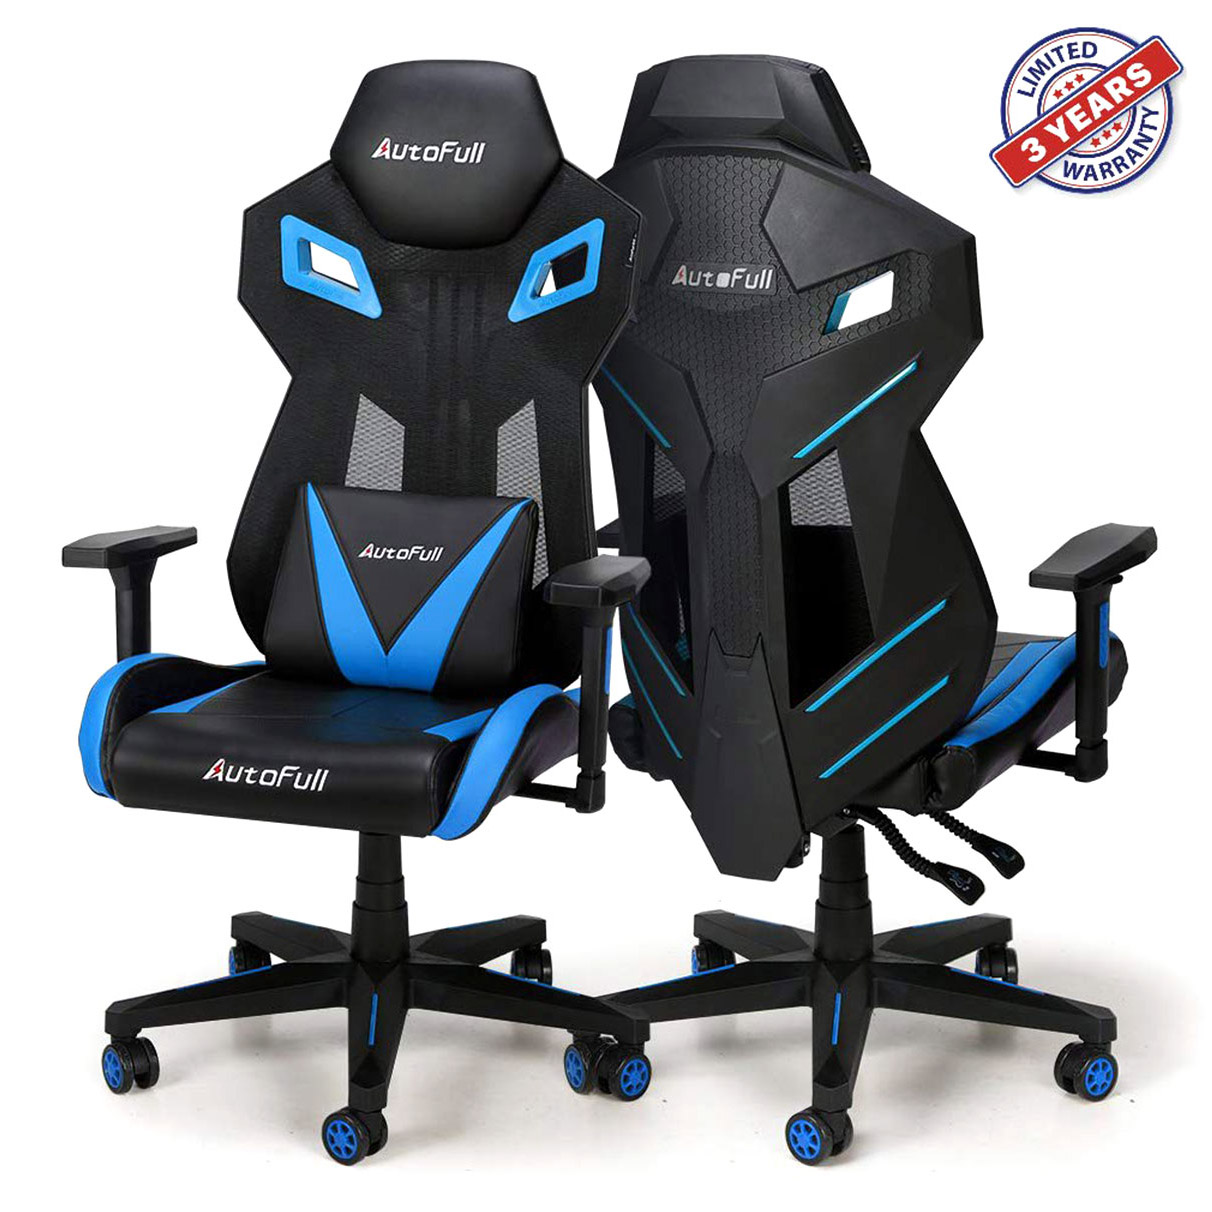 AutoFull AF047UMS Gaming Chair